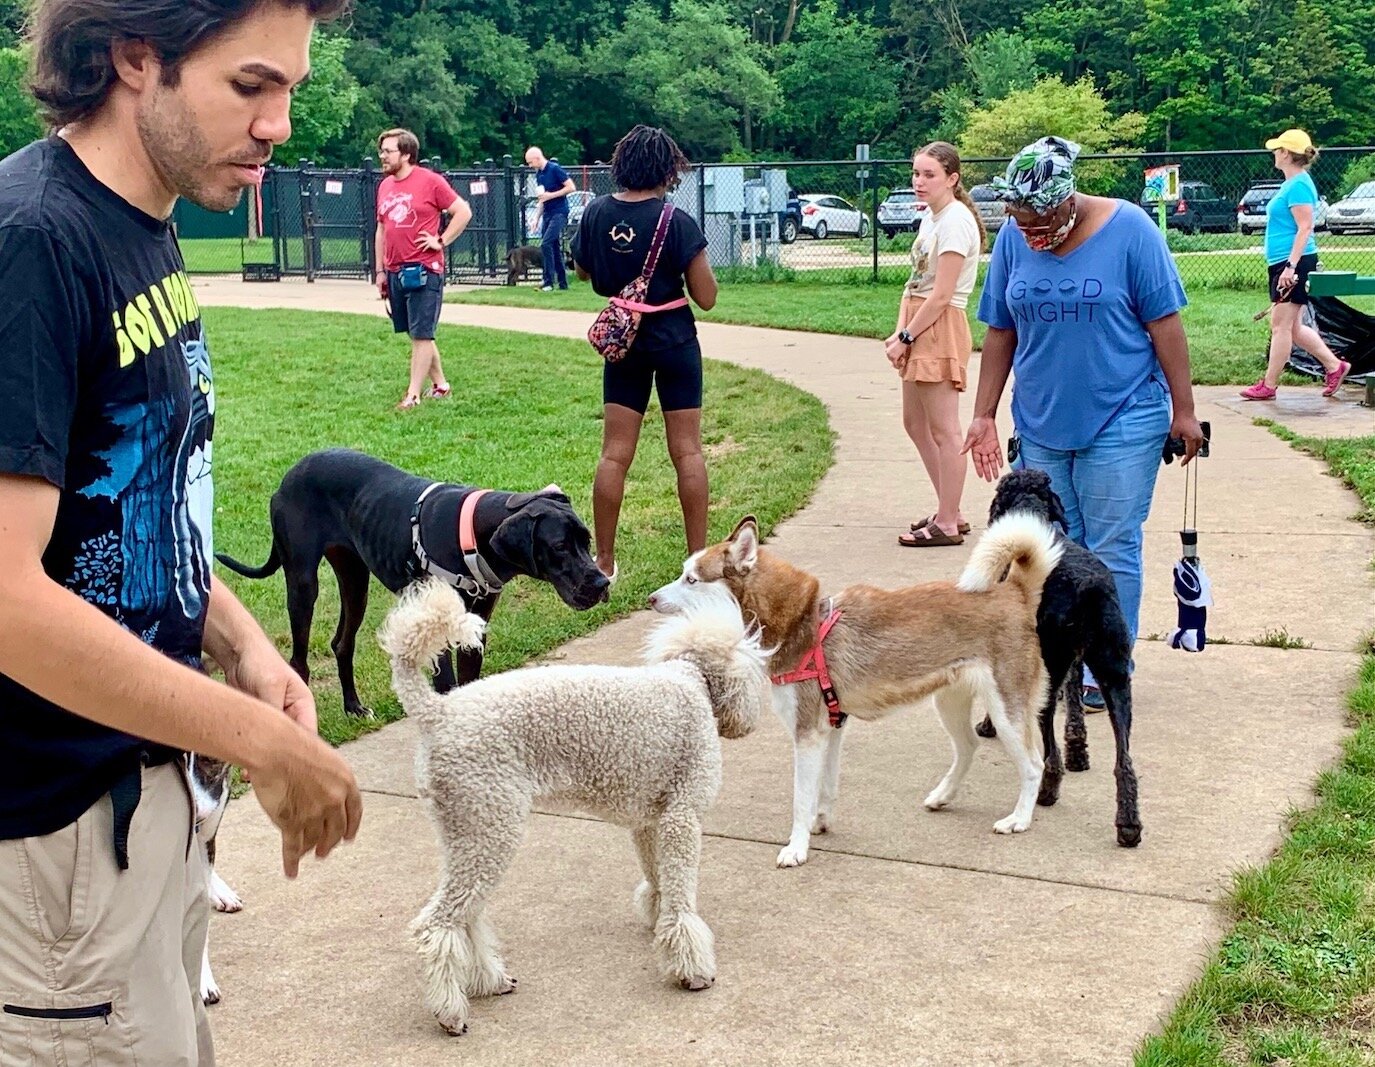 Josh Paris, left, is among those whose pets have found a regular place to socialize at the Fairmount Dog Park on Prairie Street in the West Douglas Neighborhood.